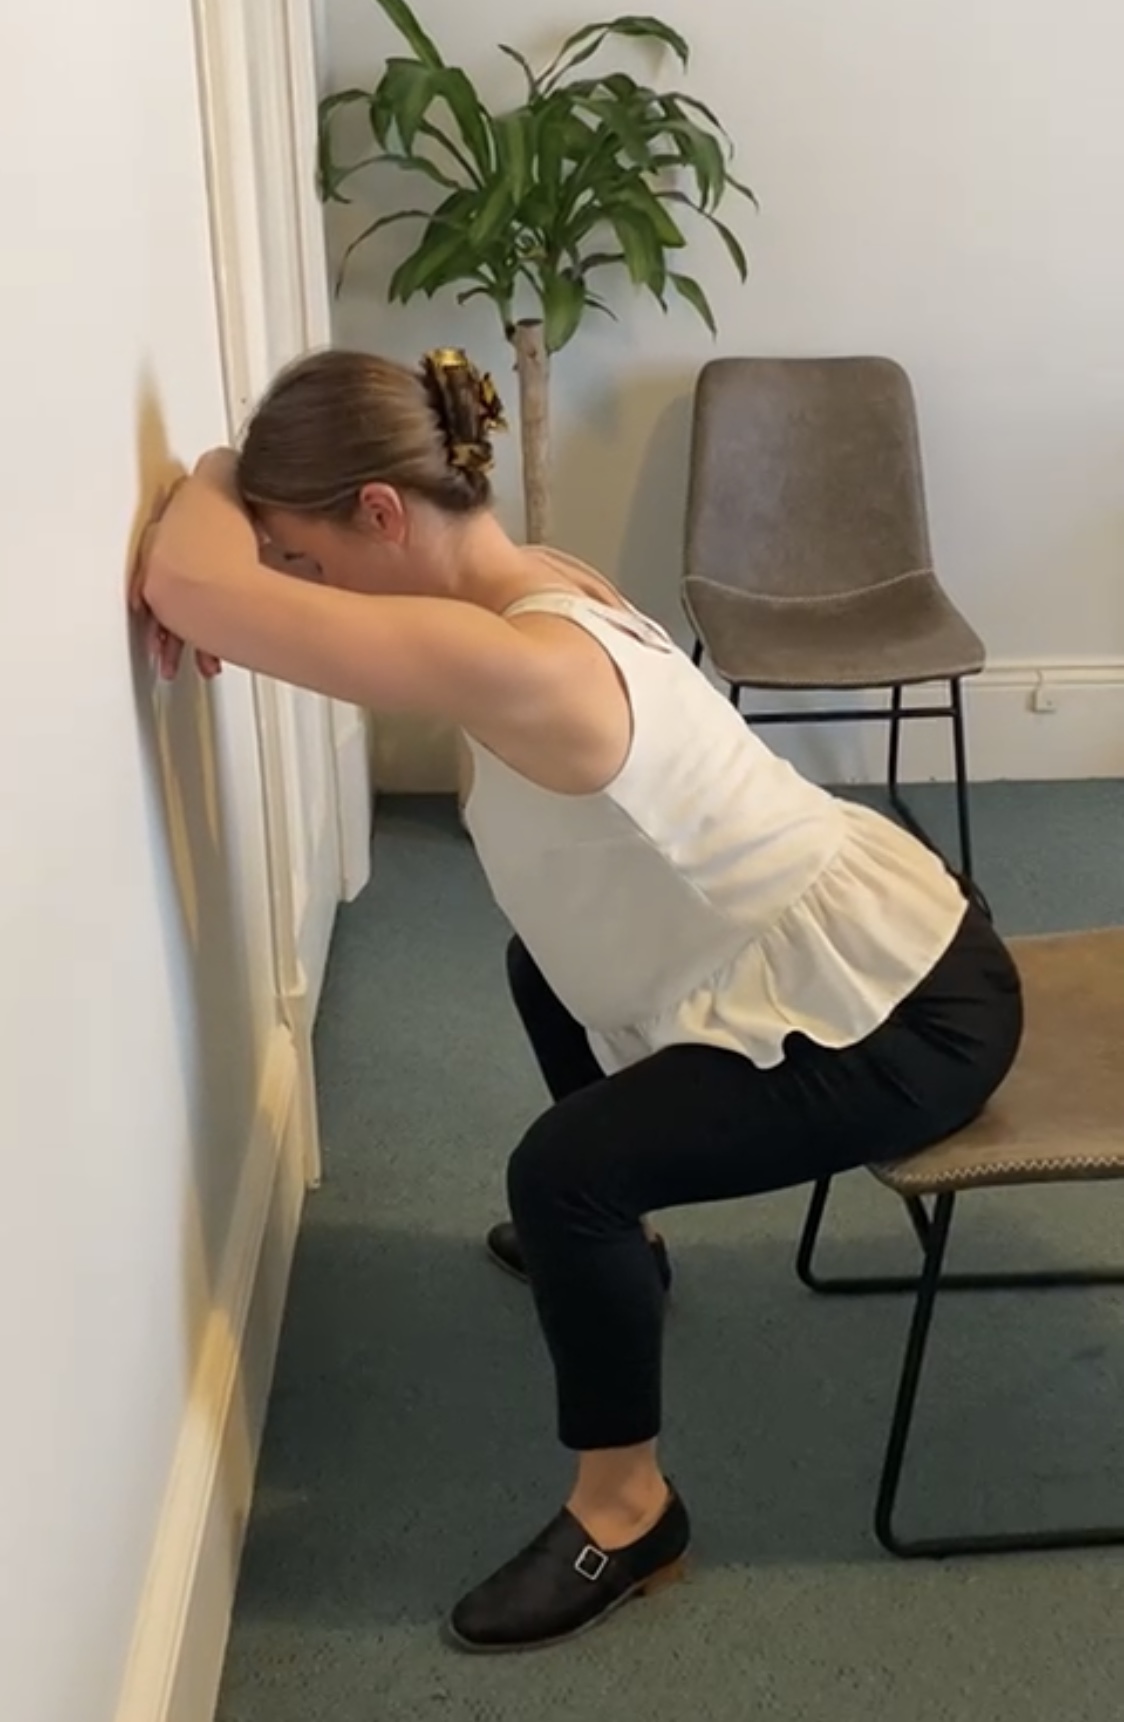 adelaide osteopath resilient health chiropractor massage osteopathy wall lean